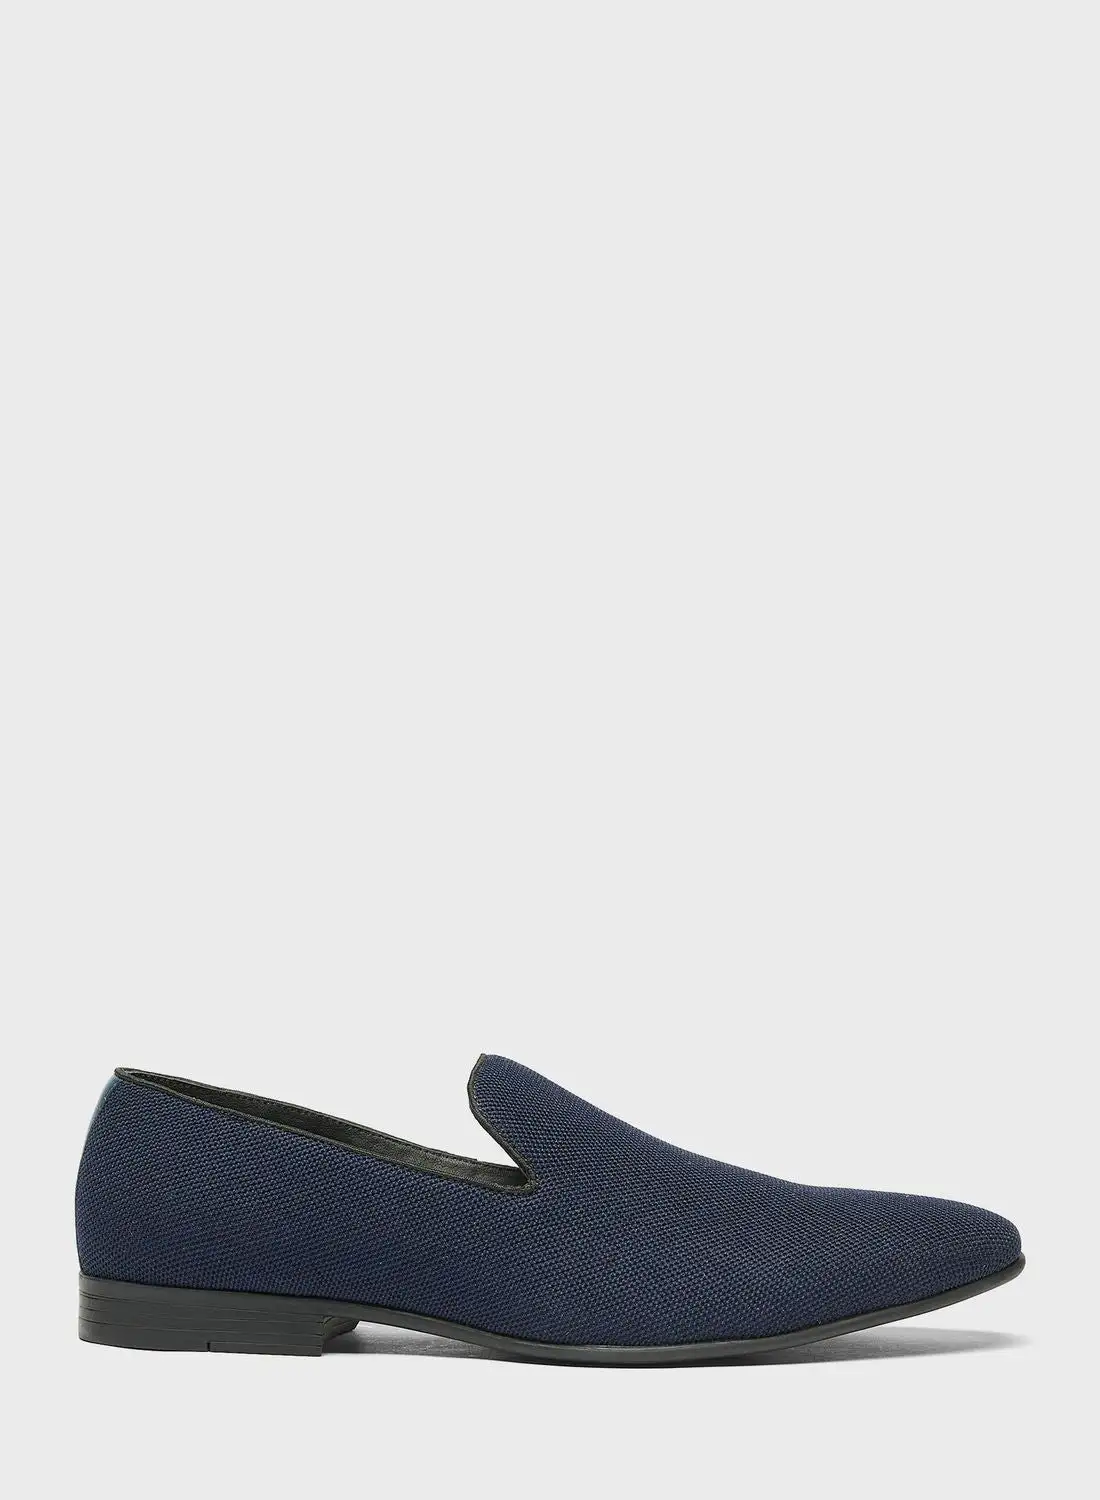 shoexpress Textured Formal Slip On Loafers